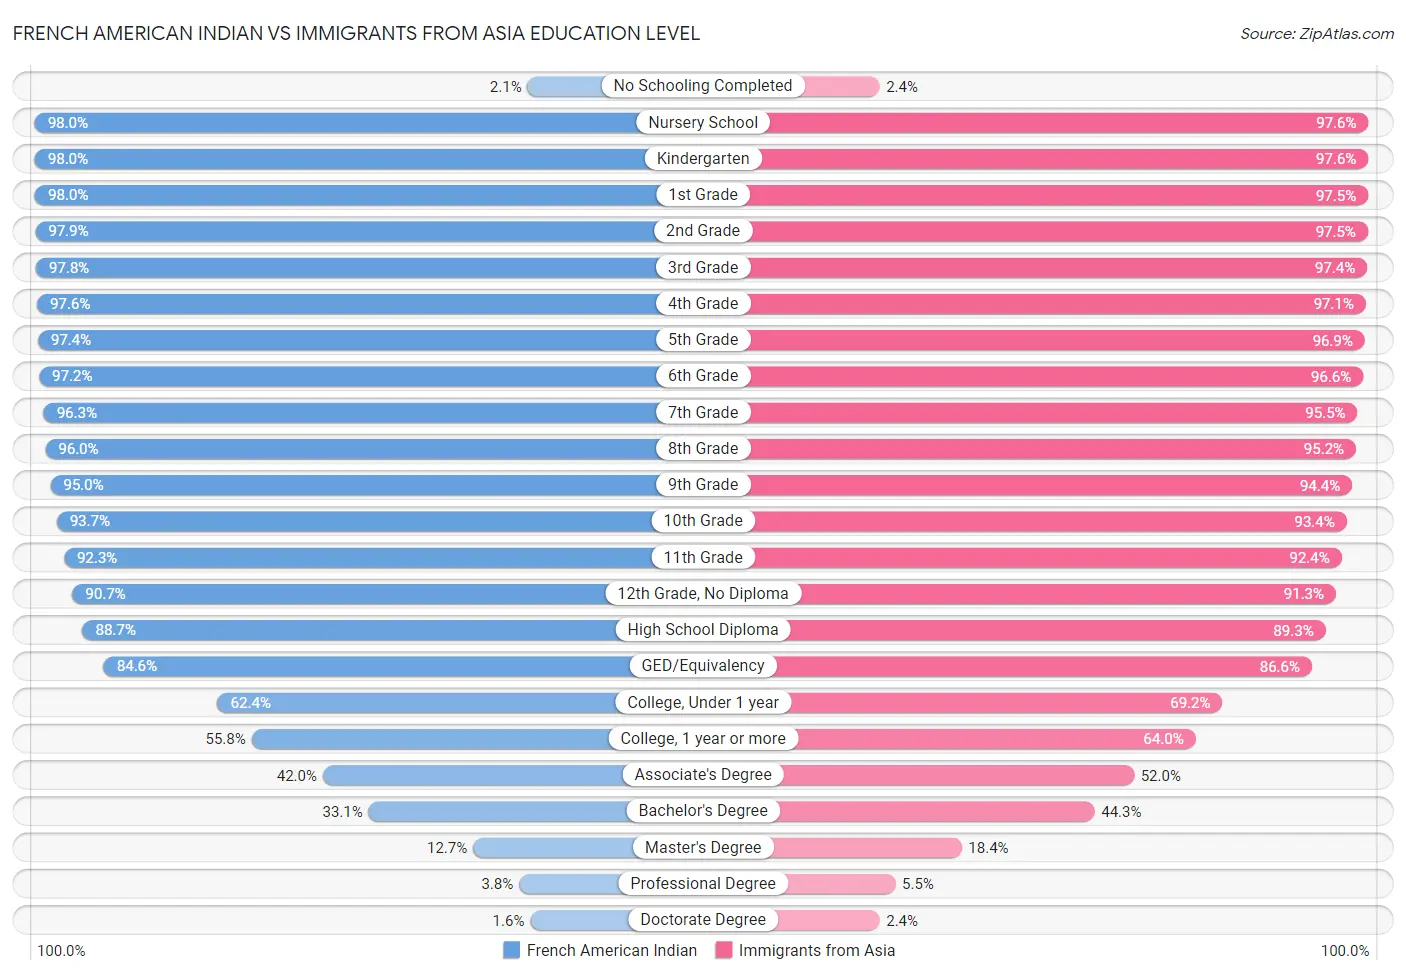 French American Indian vs Immigrants from Asia Education Level